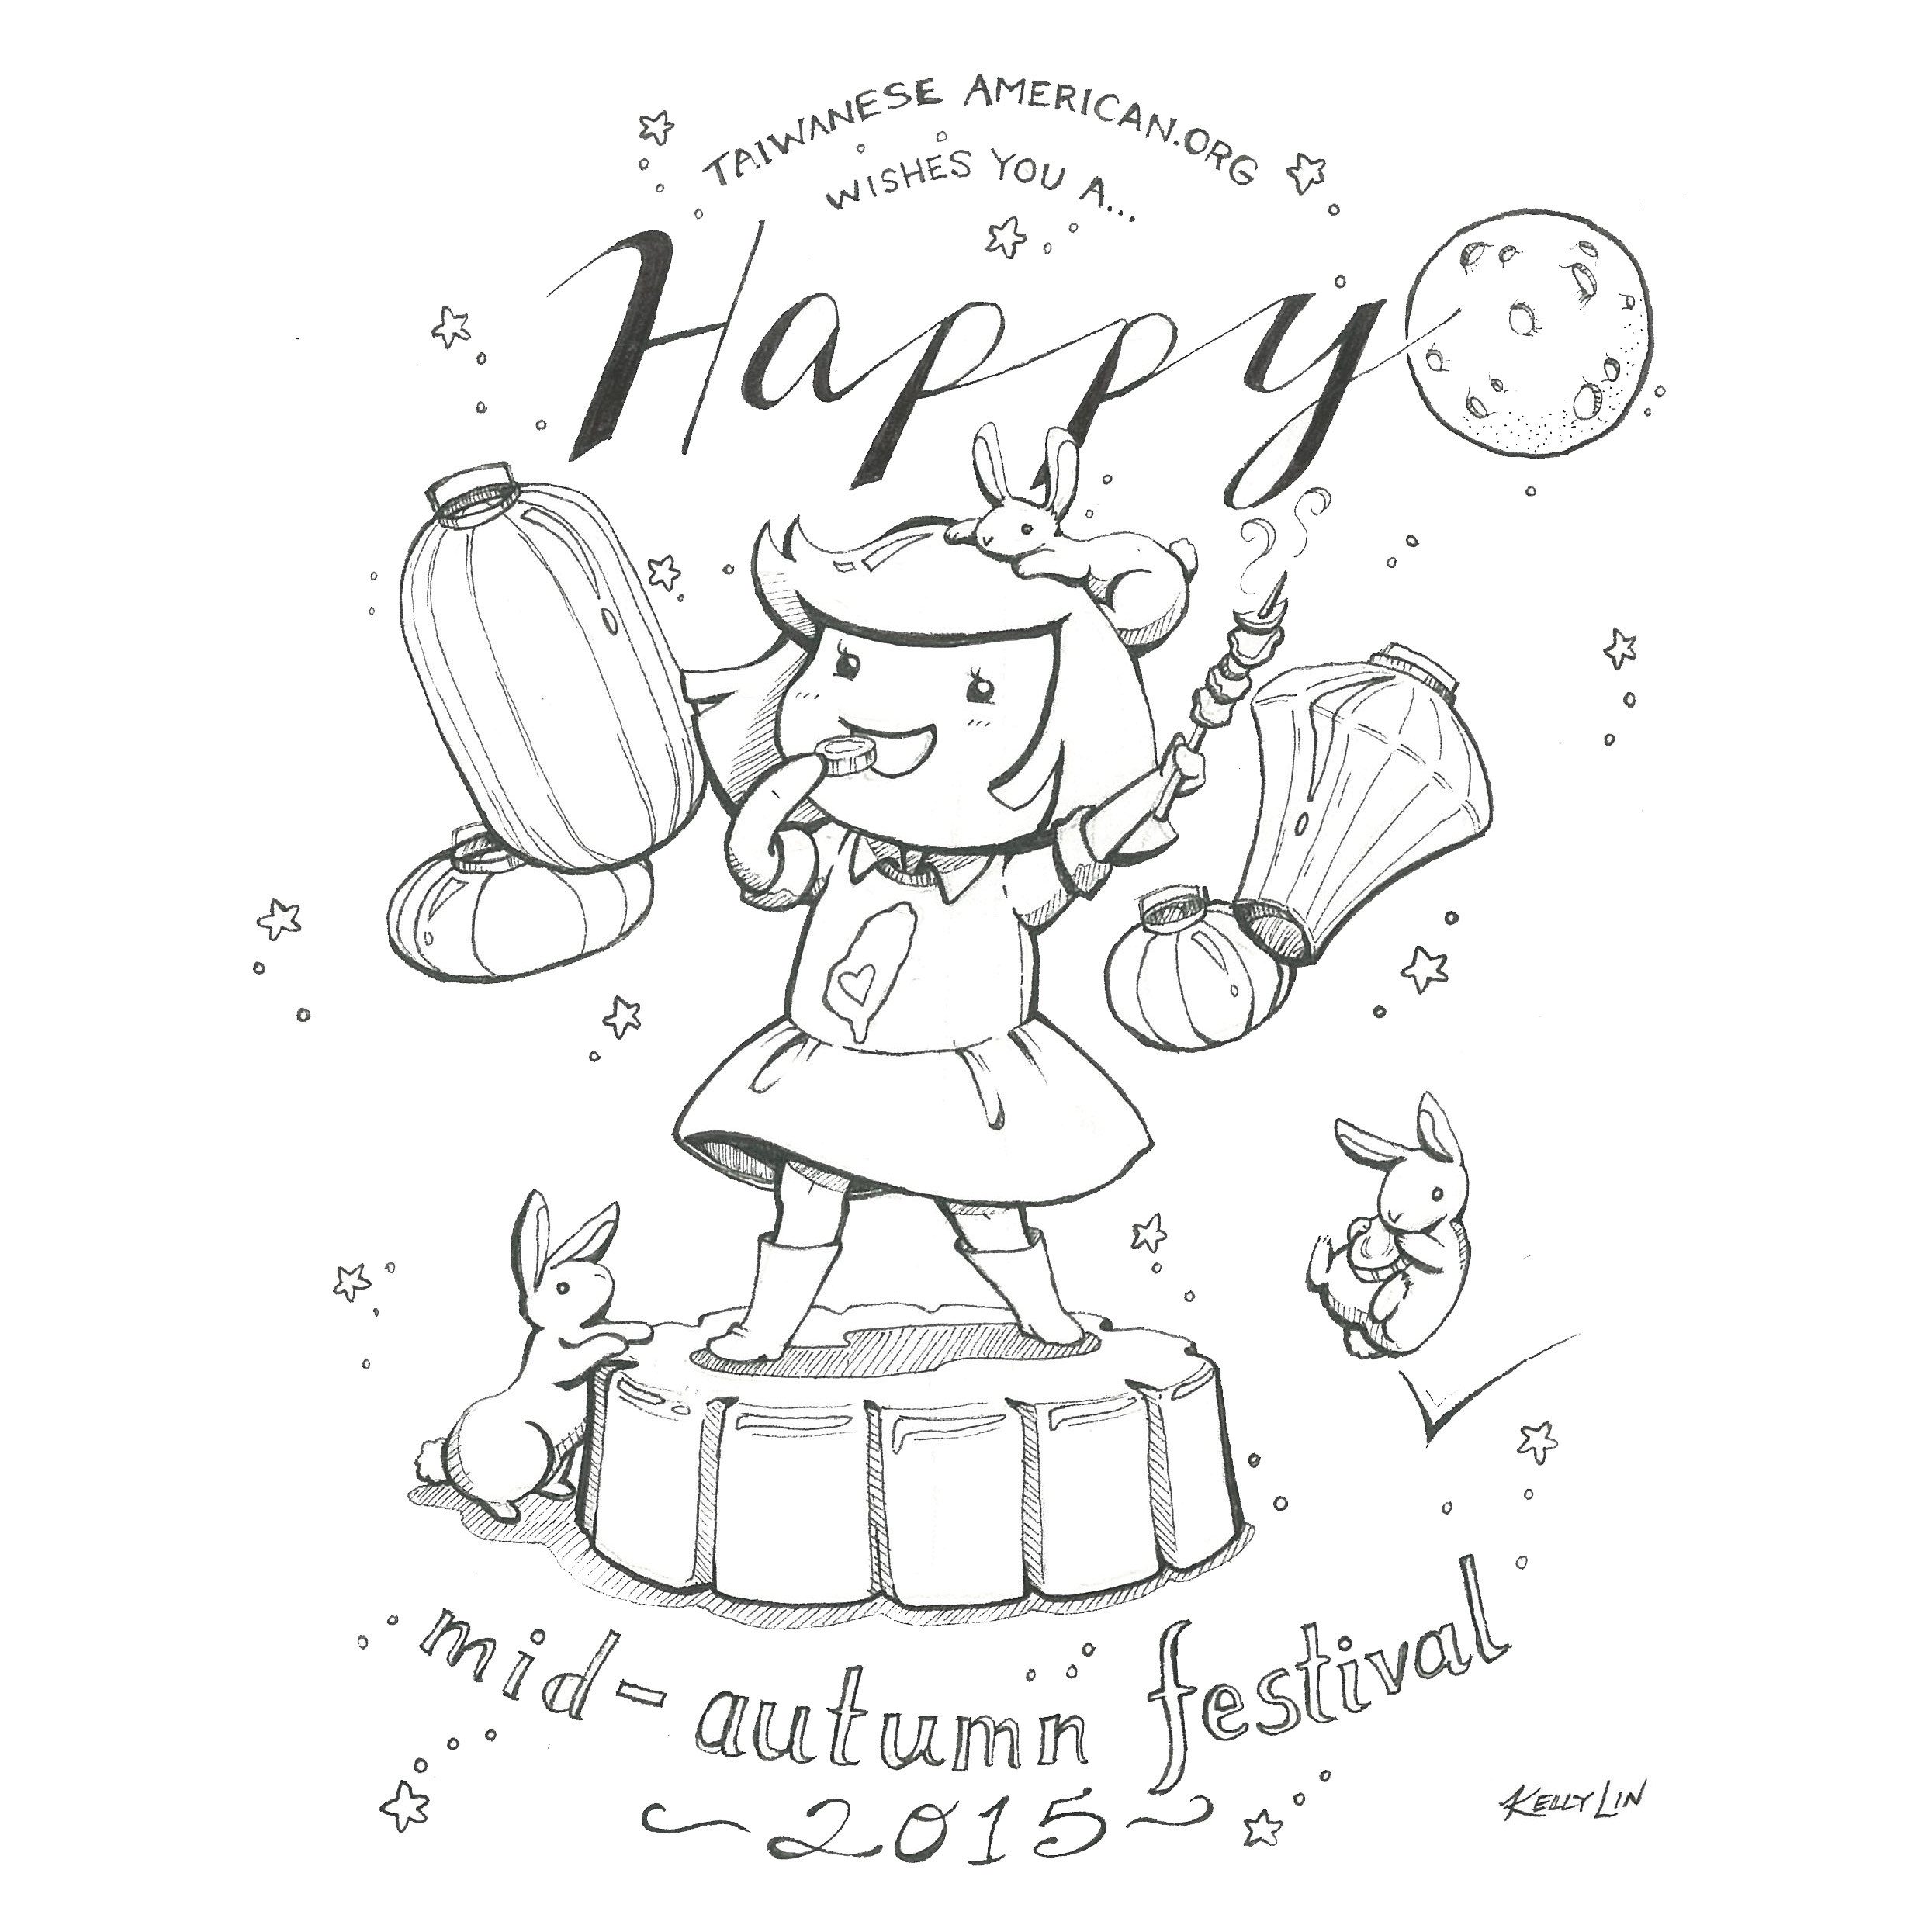 Happy Mid-Autumn Festival! Celebrate Friends and Family!